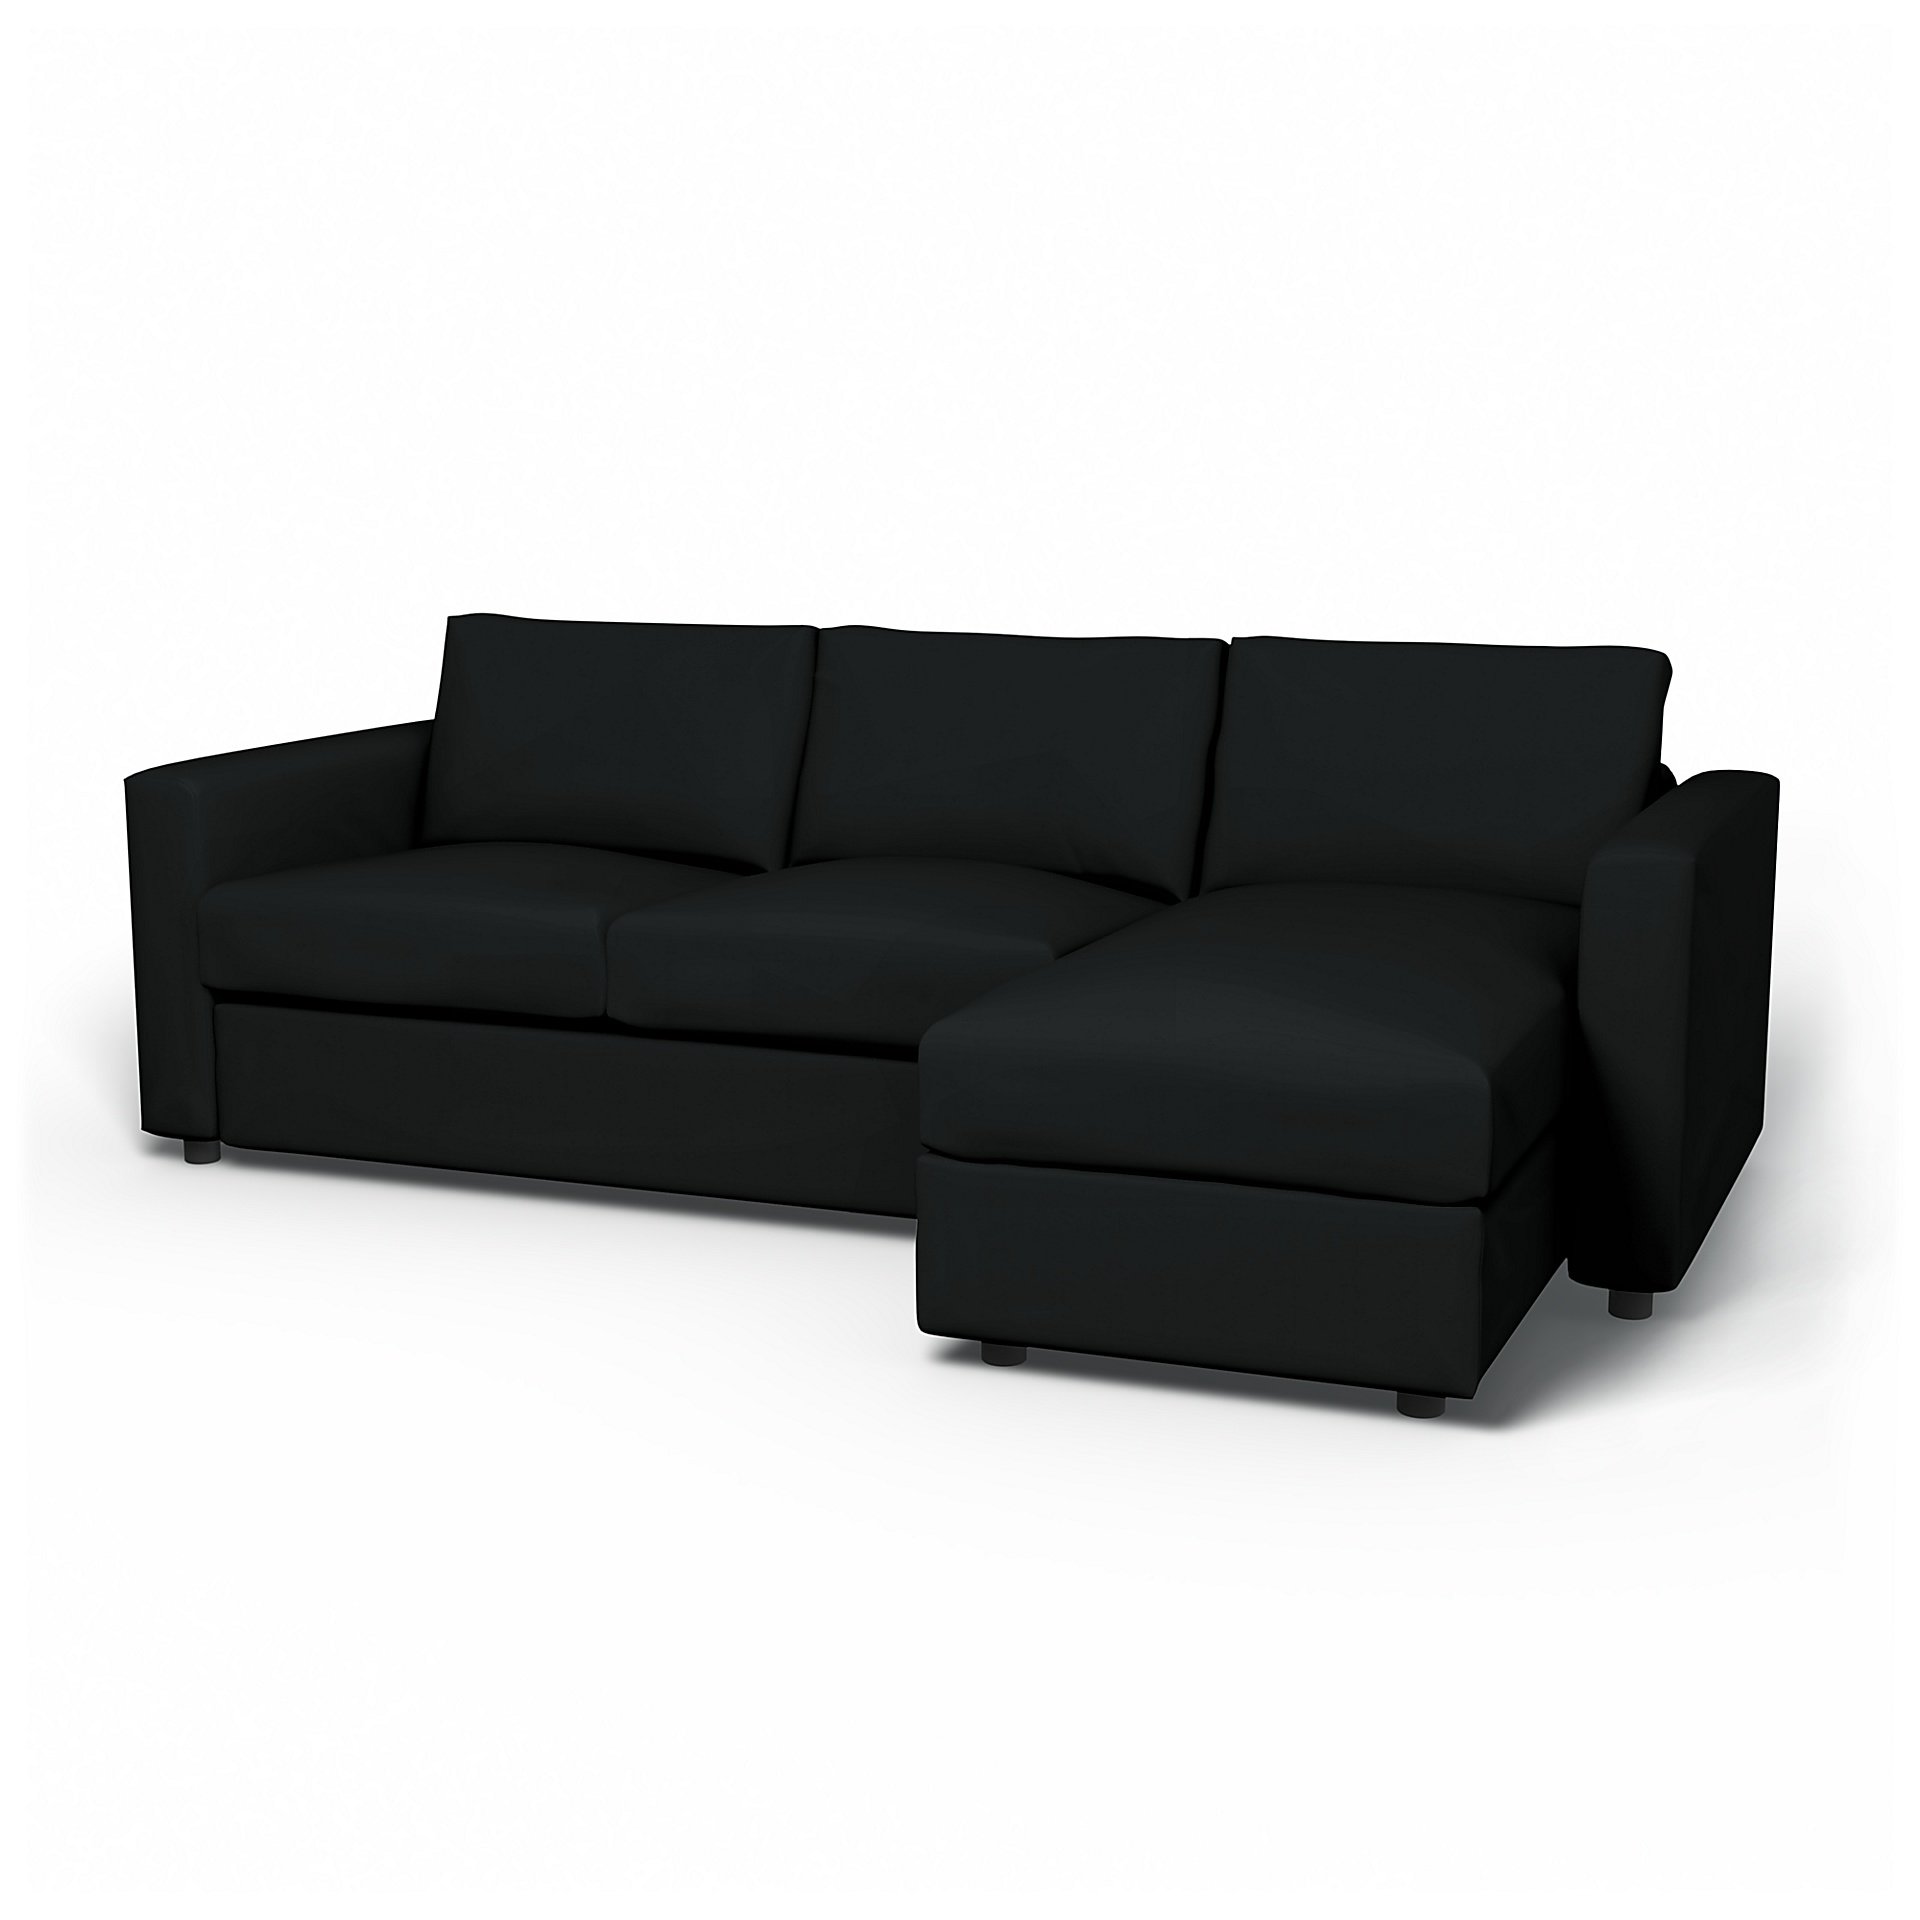 IKEA - Vimle 2 Seater Sofa with Chaise Cover, Jet Black, Cotton - Bemz